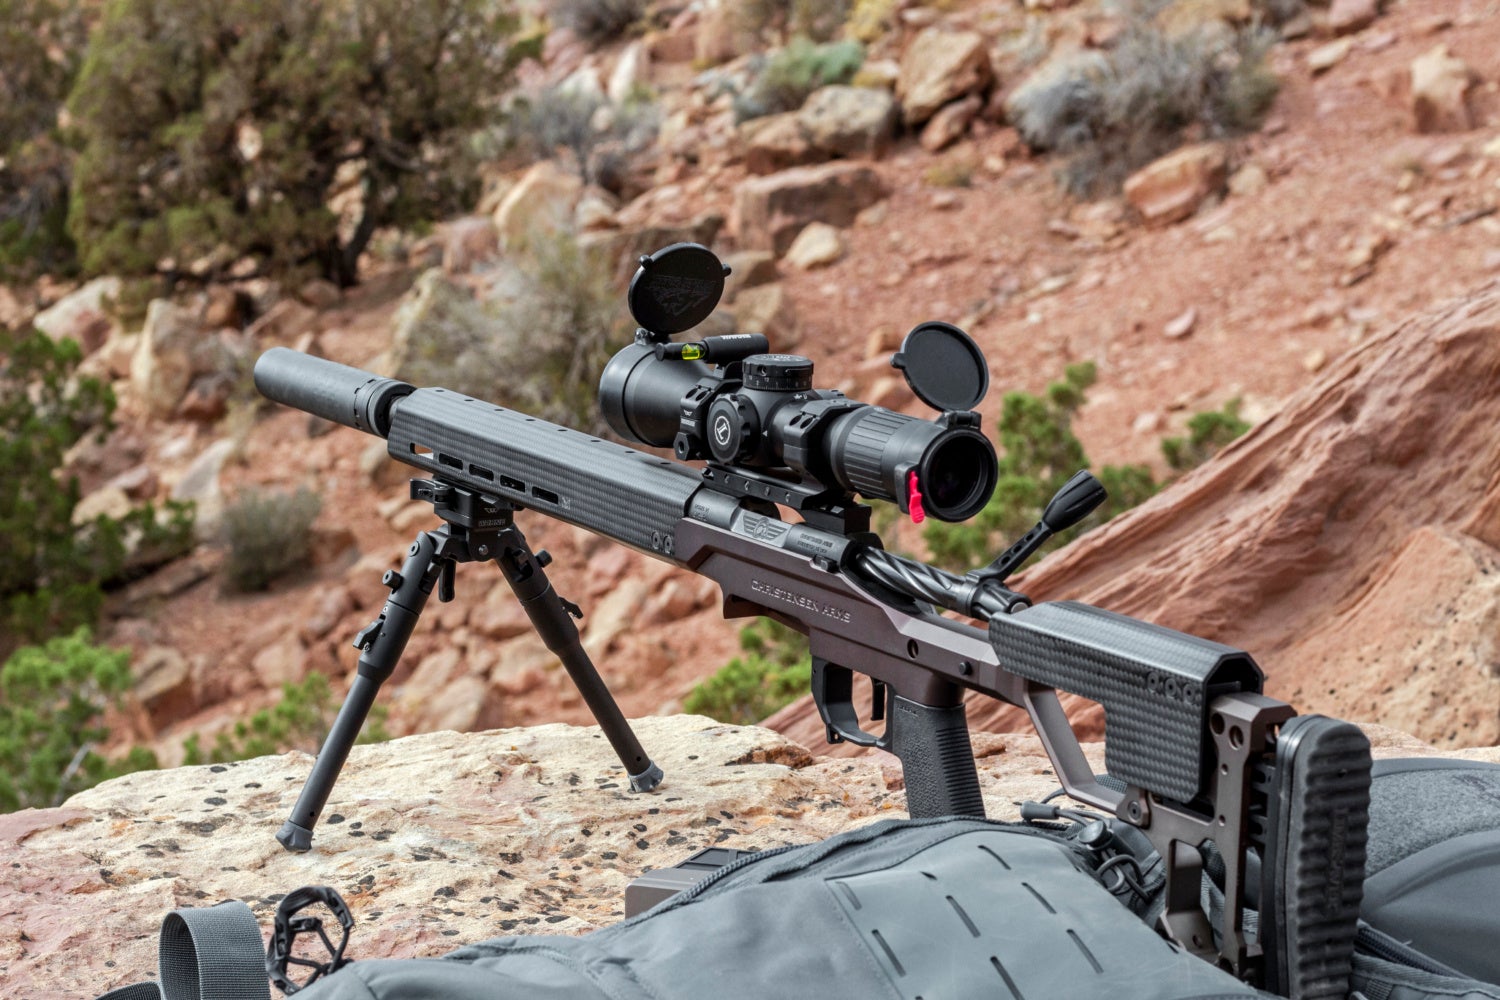 Warne Introduces the New Affordable Skyline Lite Bipod 